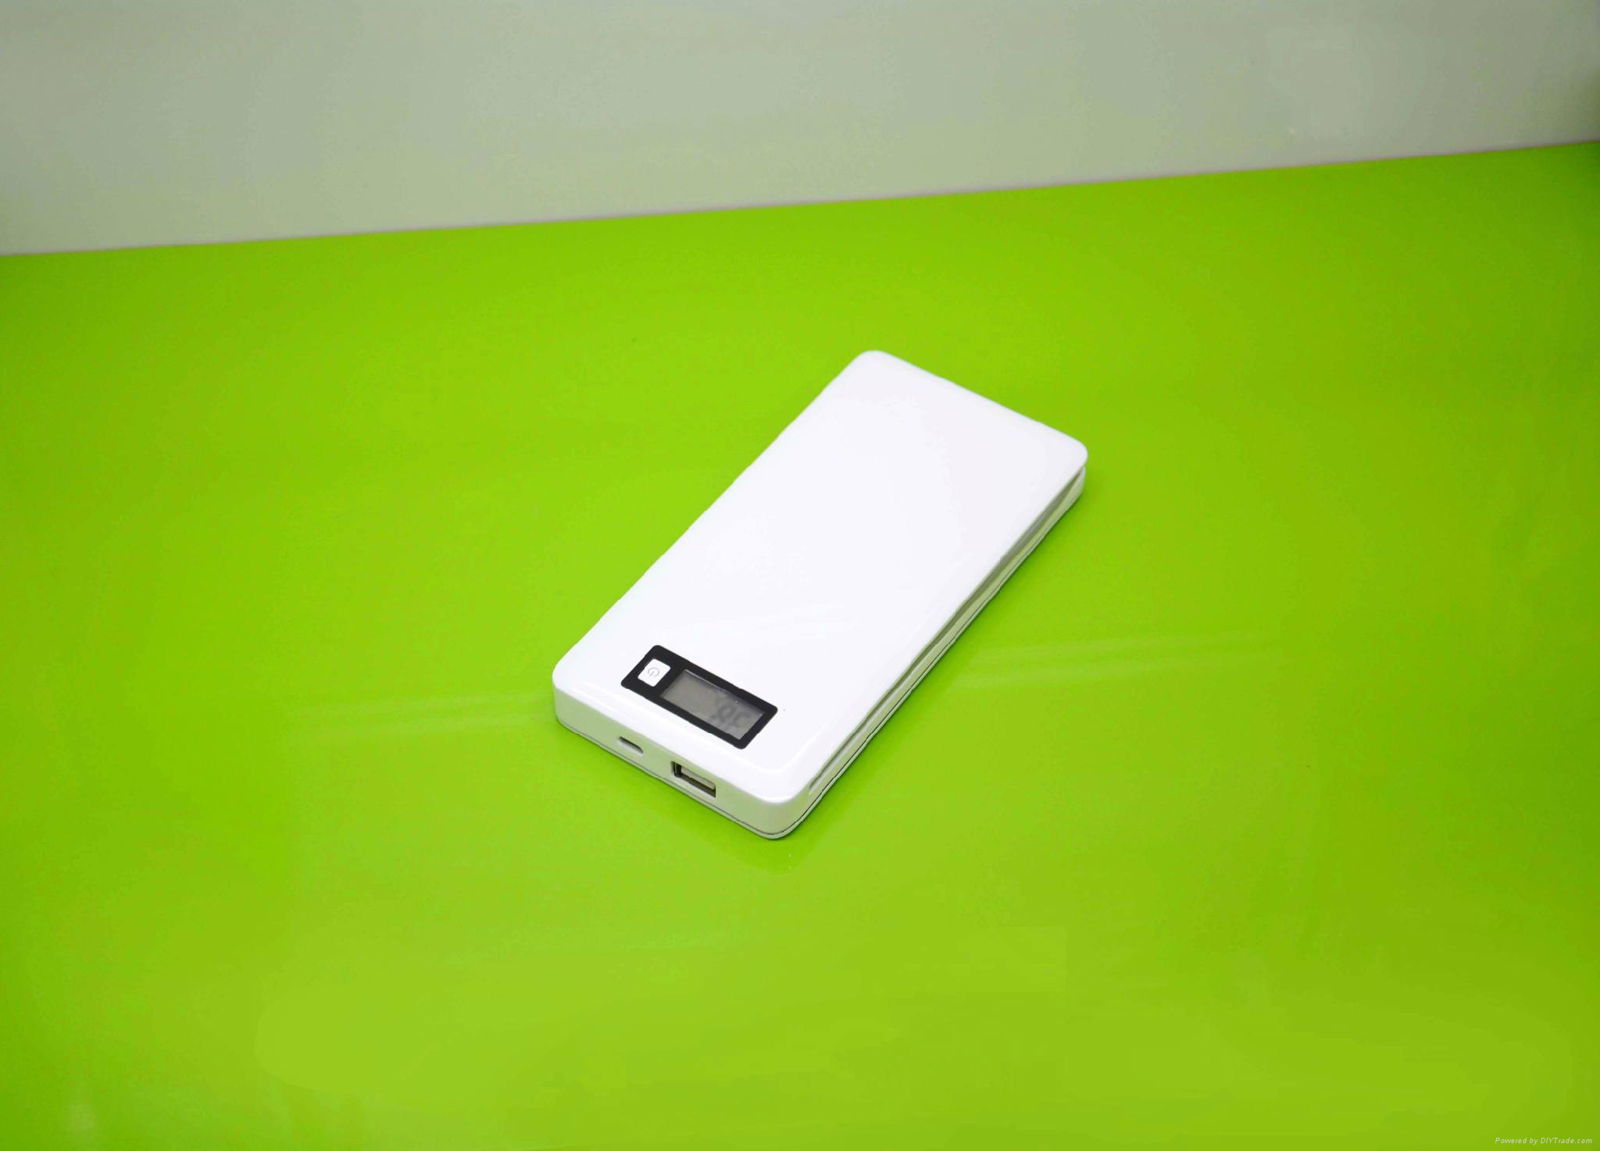 New 7000mAh Universal Portable Power Bank Battery Charger for Mobile Devices 2